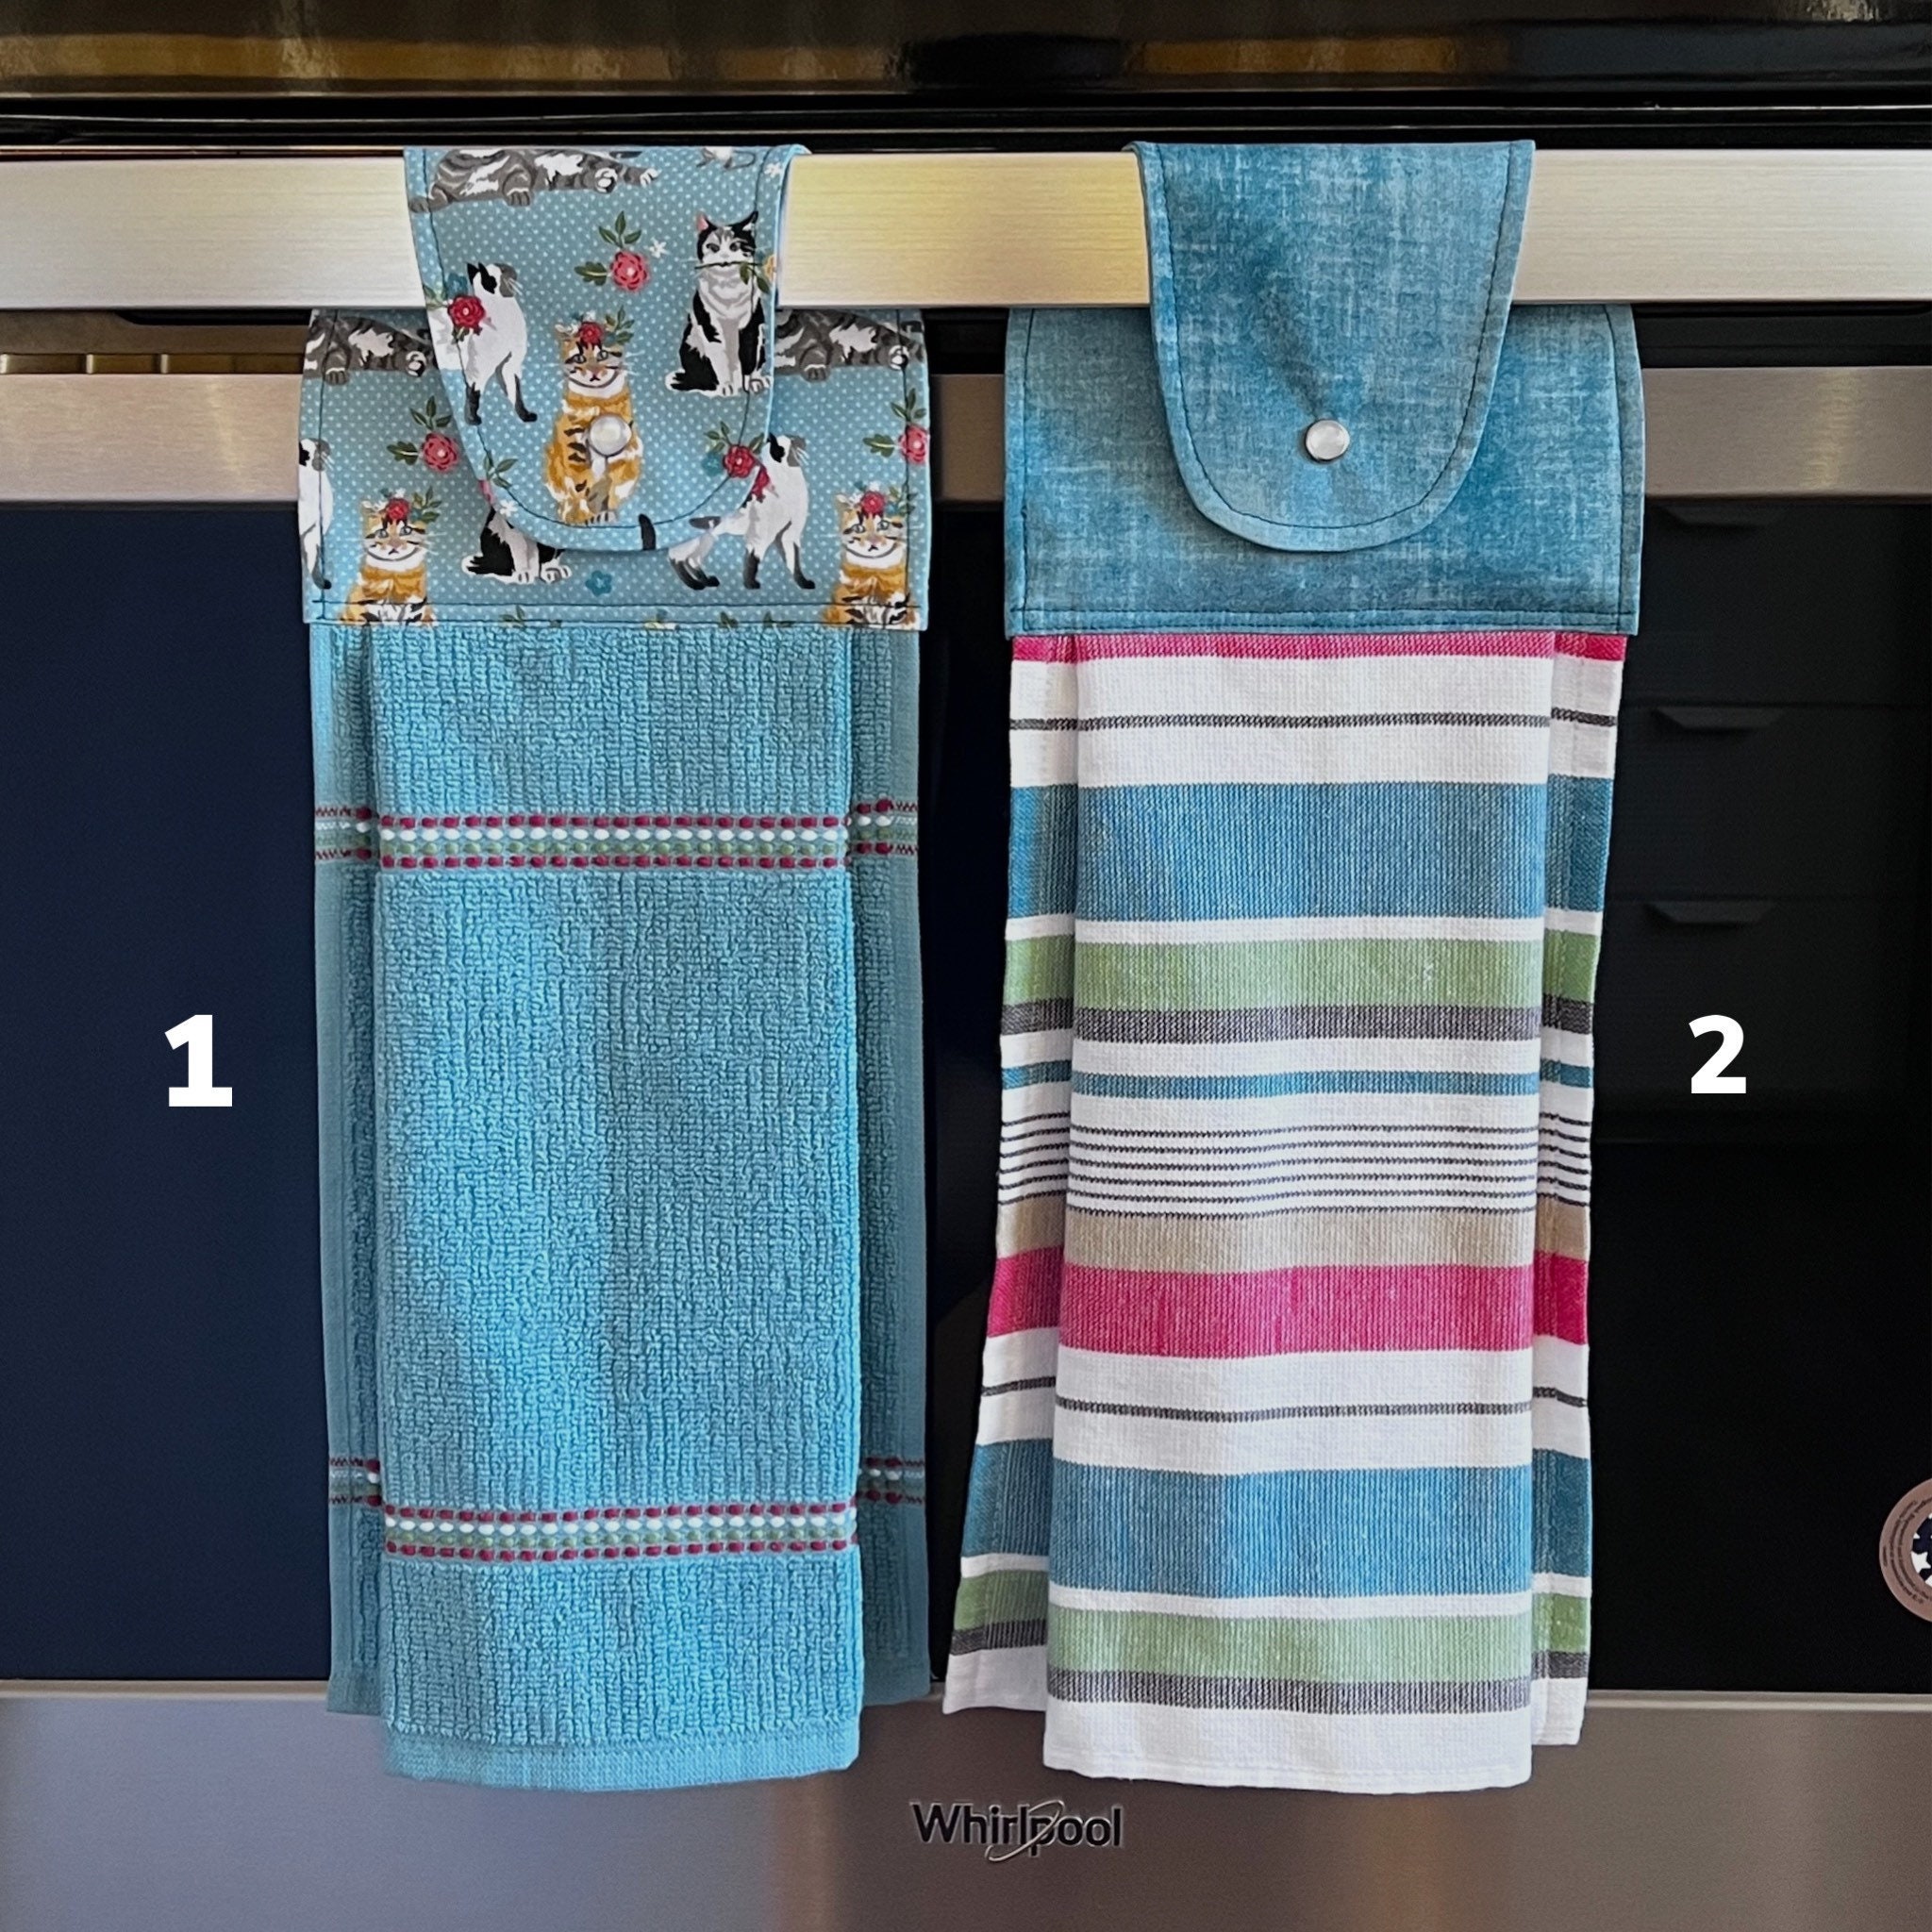 Hanging Towel, Cherry Kitchen Towel, Snap on Towel, Red Kitchen Towel, Snap  on Hand Towel, Oven Door Towel, Stay Put Towel 